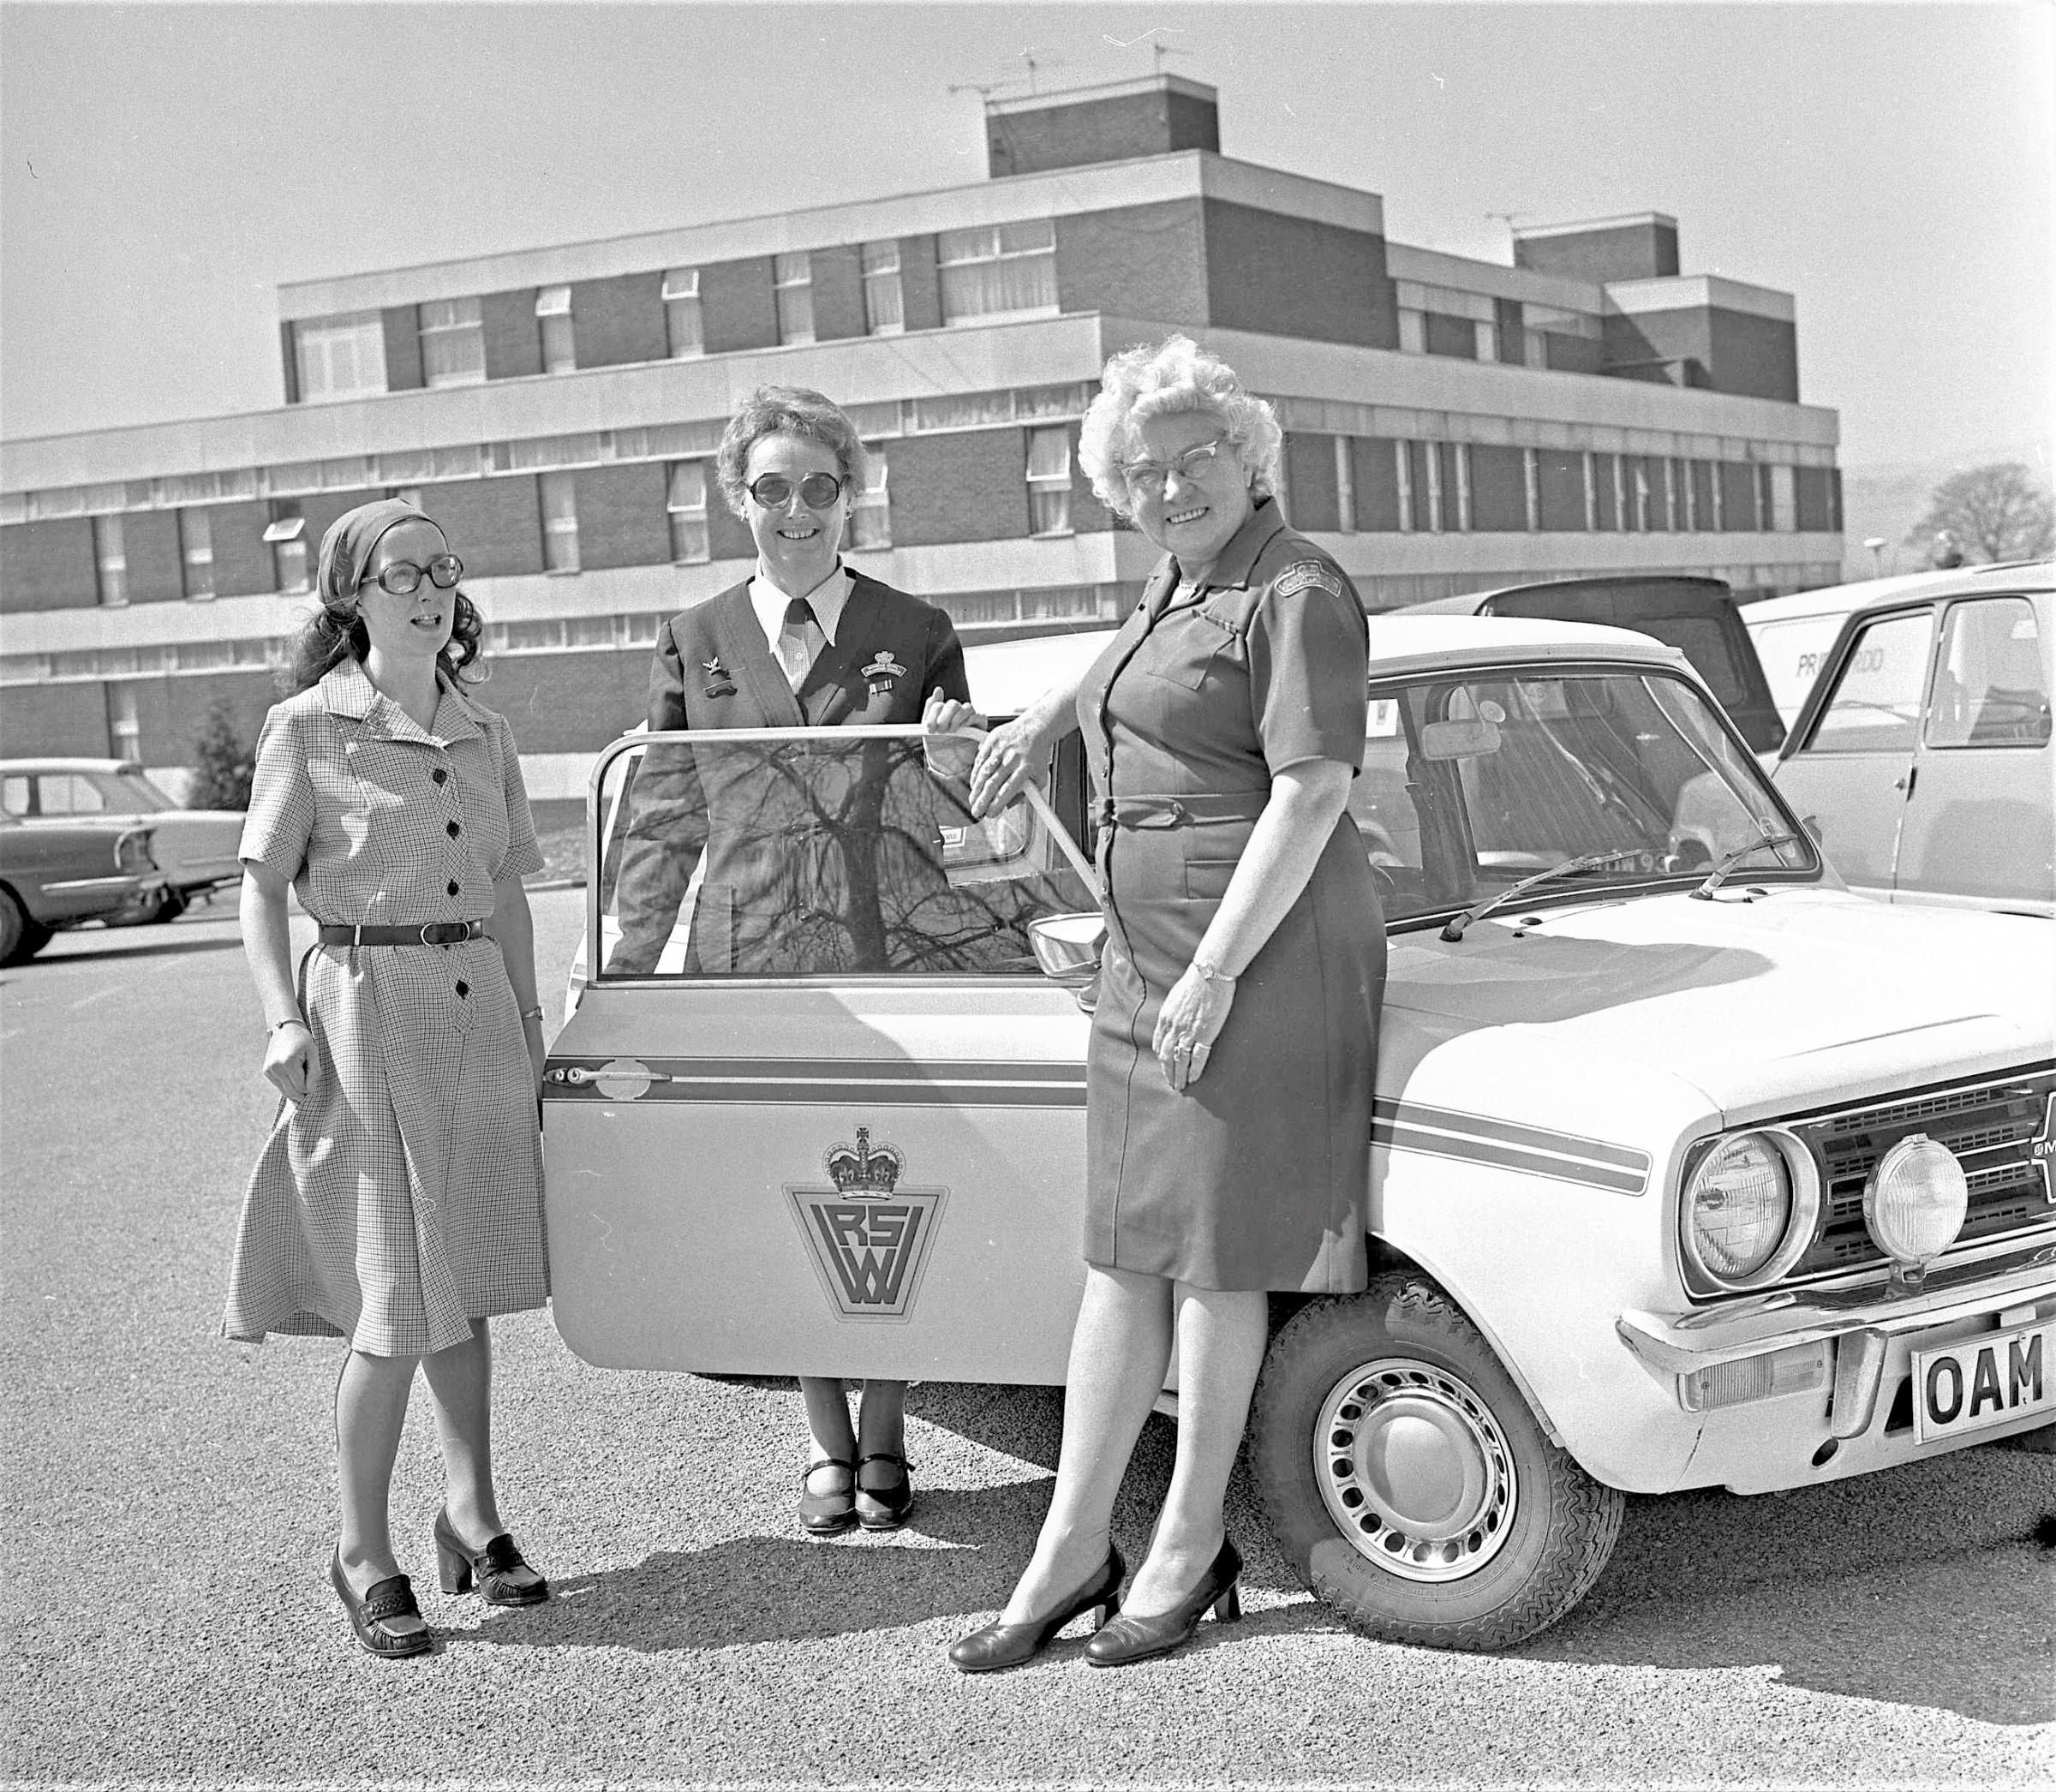 Motoring for the Clwyd WRVS, 1978.